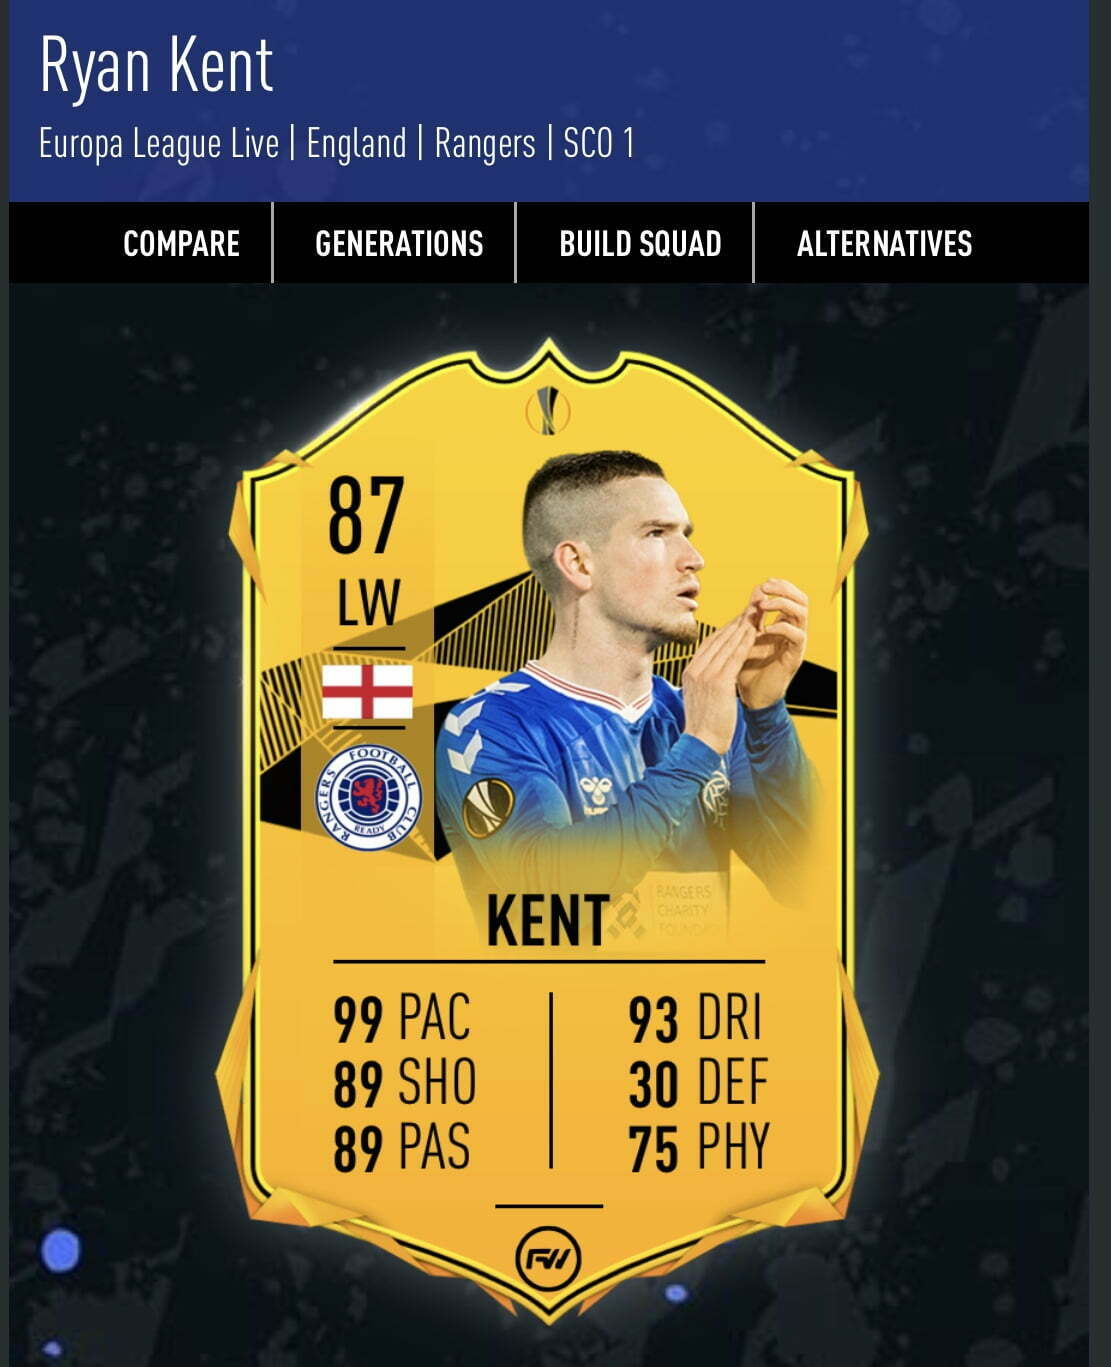 Most Hated FIFA Card Got an Upgrade!